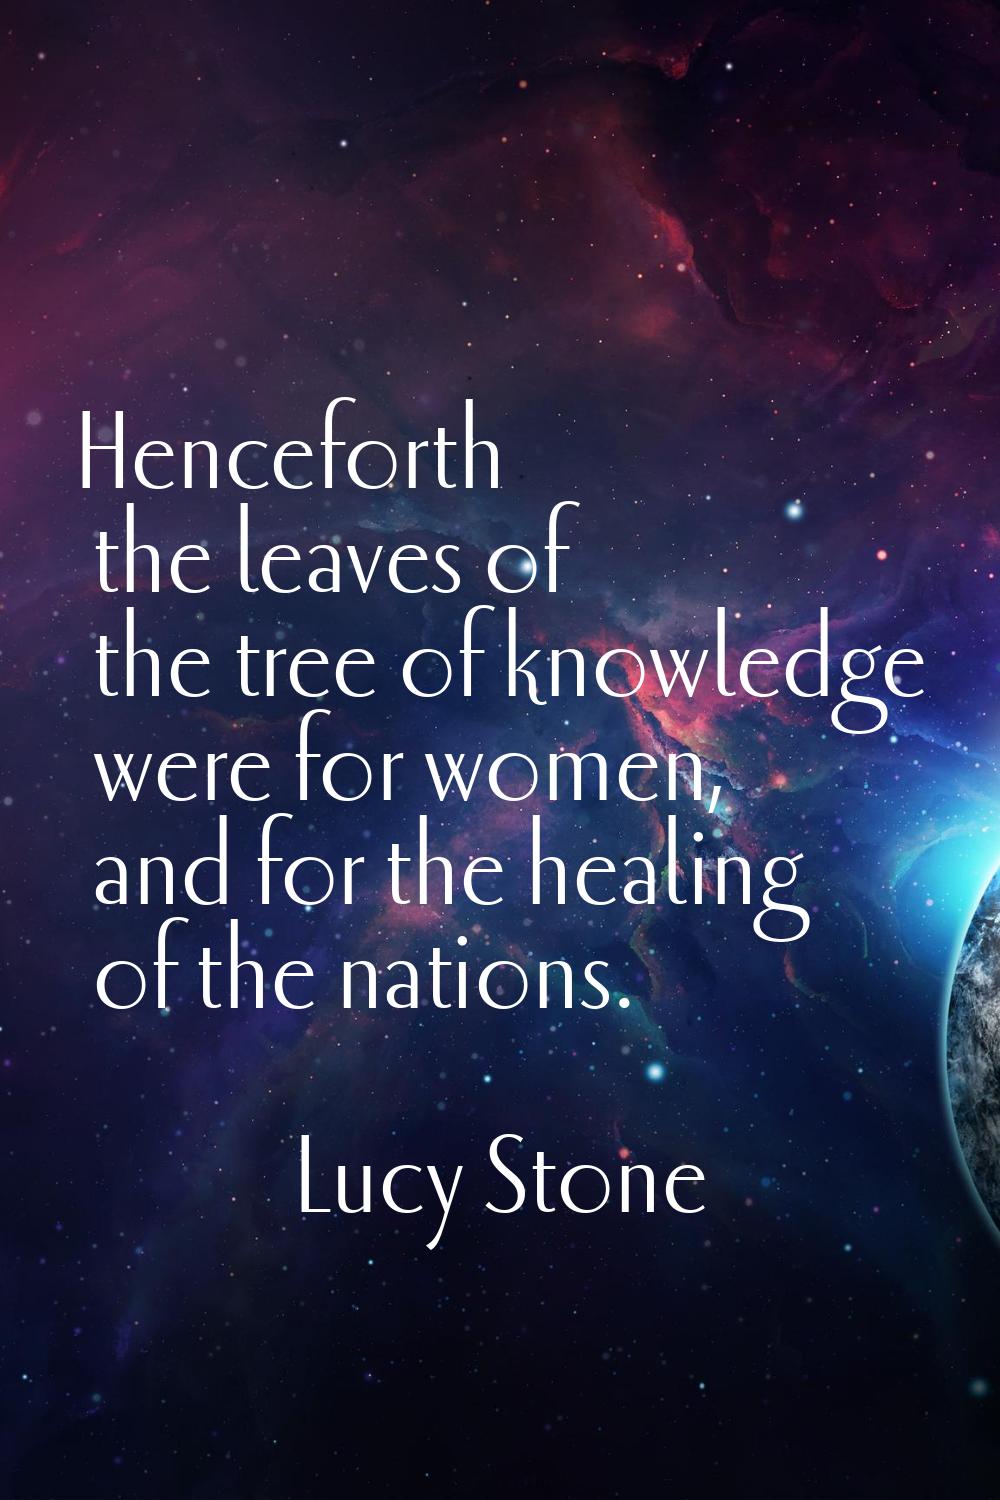 Henceforth the leaves of the tree of knowledge were for women, and for the healing of the nations.